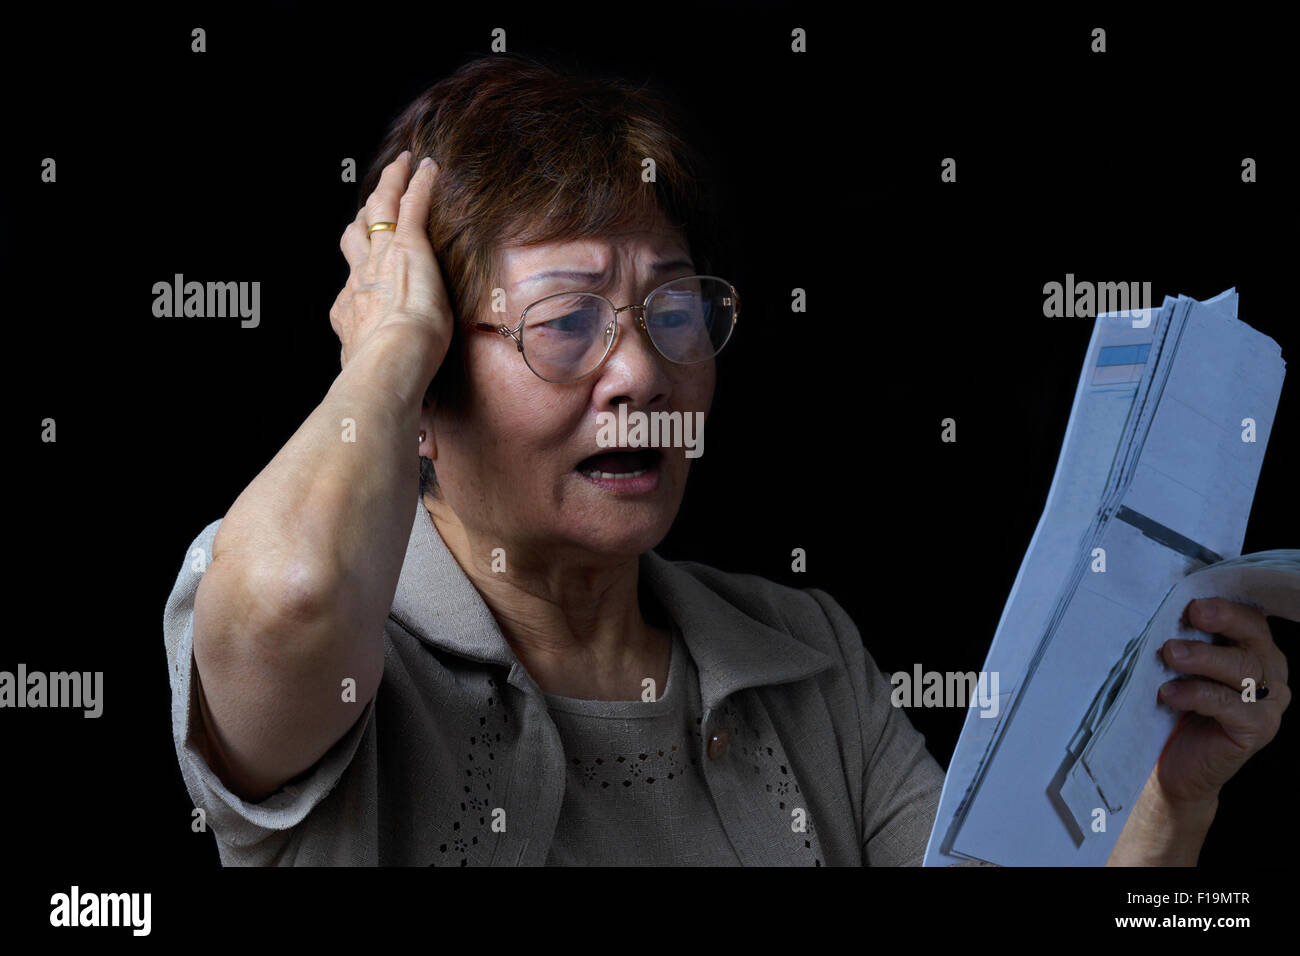 Senior woman stressed out by looking at her bills. Black background. Stock Photo